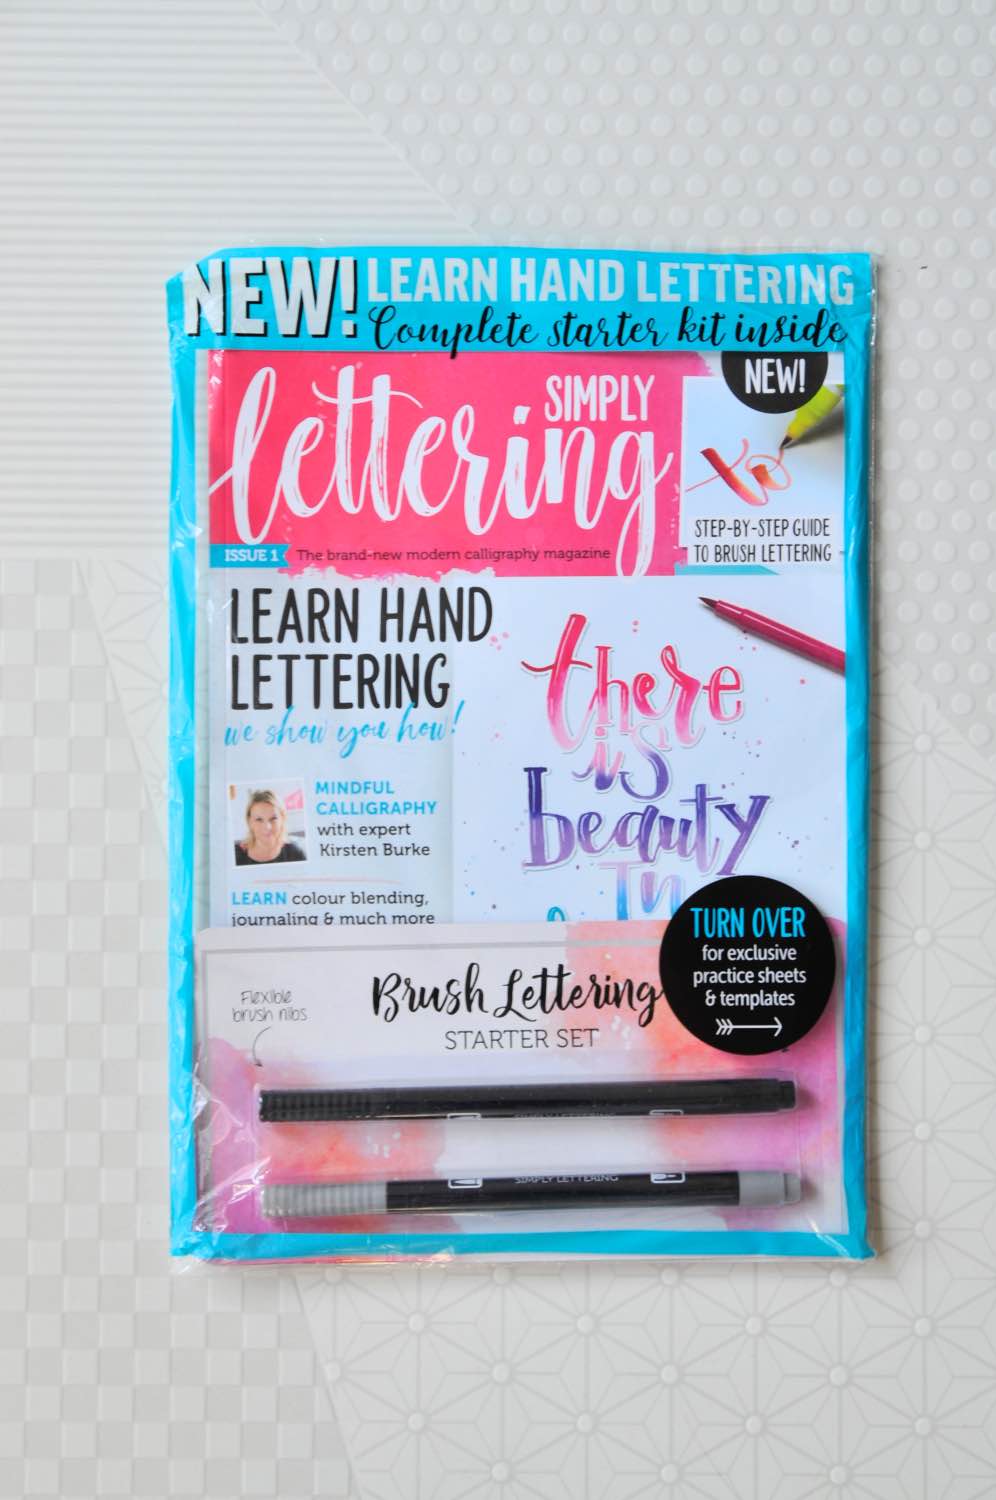 hand lettering magazine - simply lettering by pop shop america